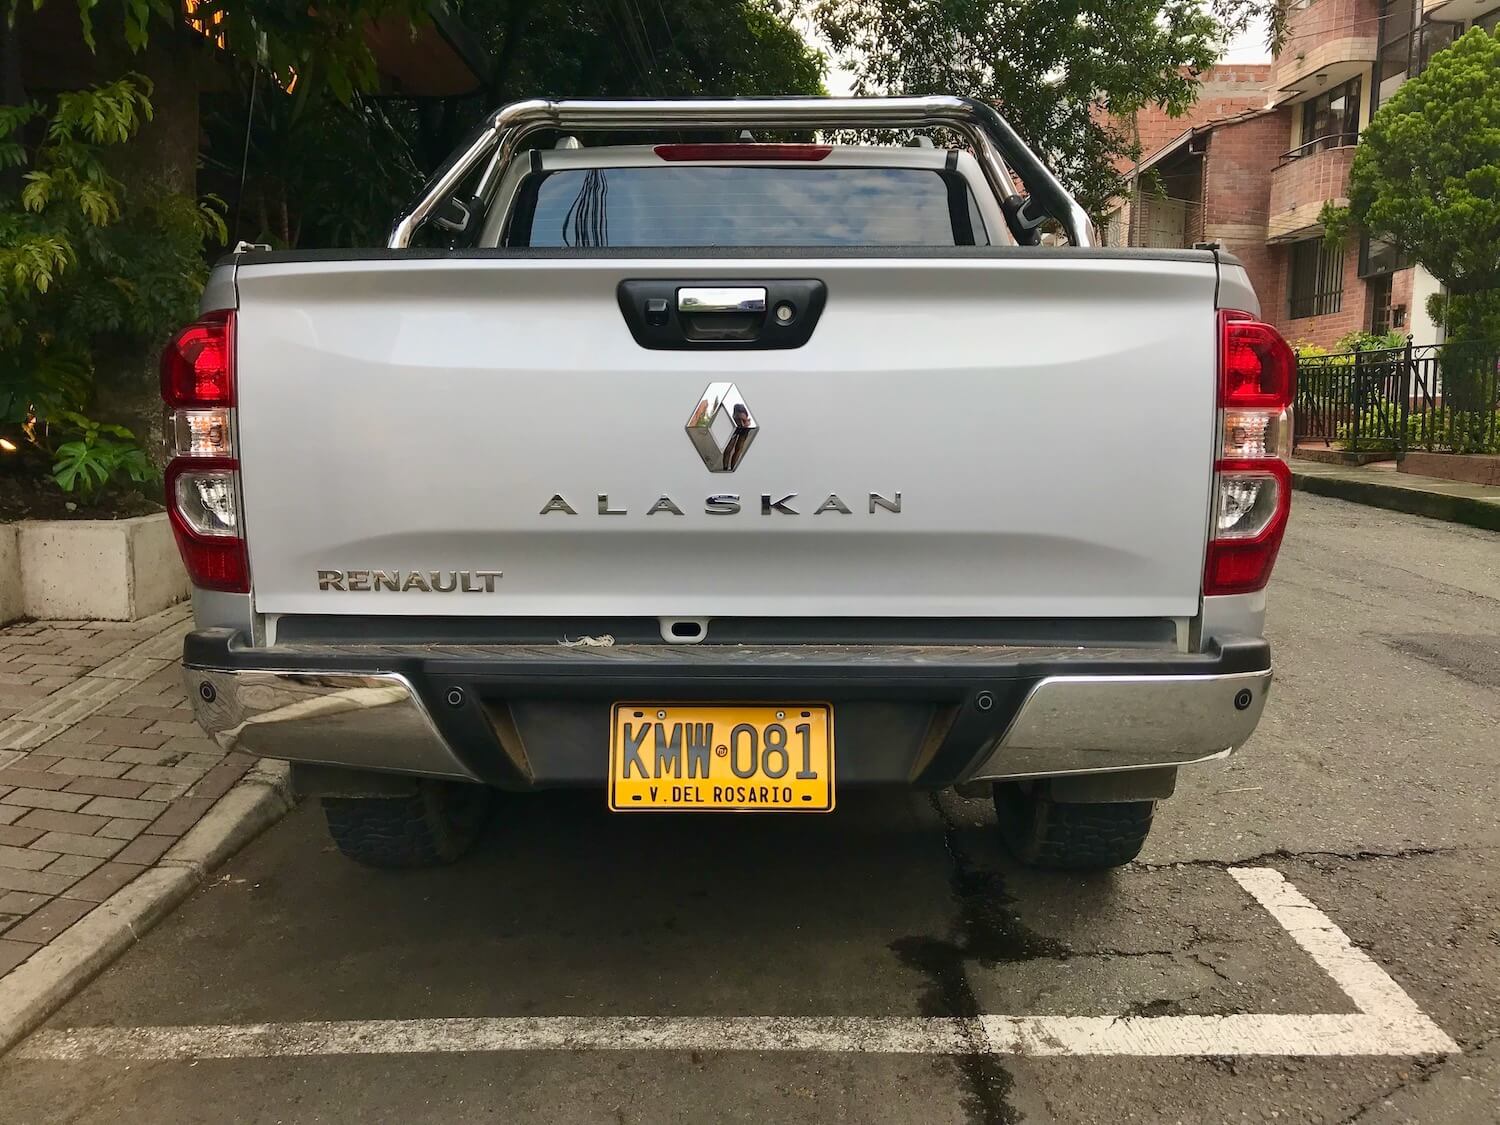 The tailgate of a Renault midsize pickup truck on the streets of Medellin Colombia, with its "Alaskan" badge visible.